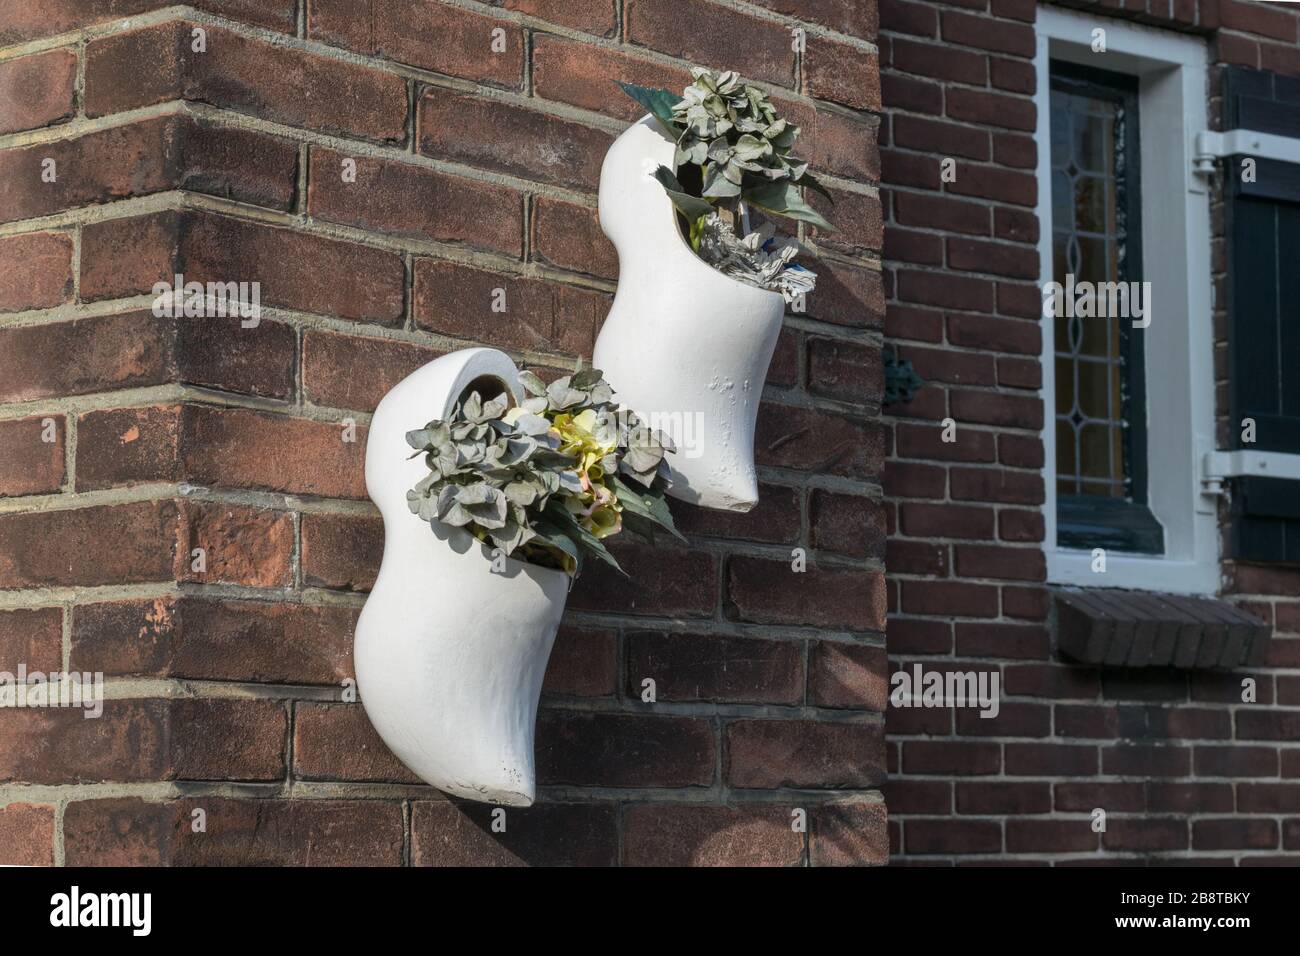 White wooden shoes or clogs filled with flowering plants on a brick wall Stock Photo